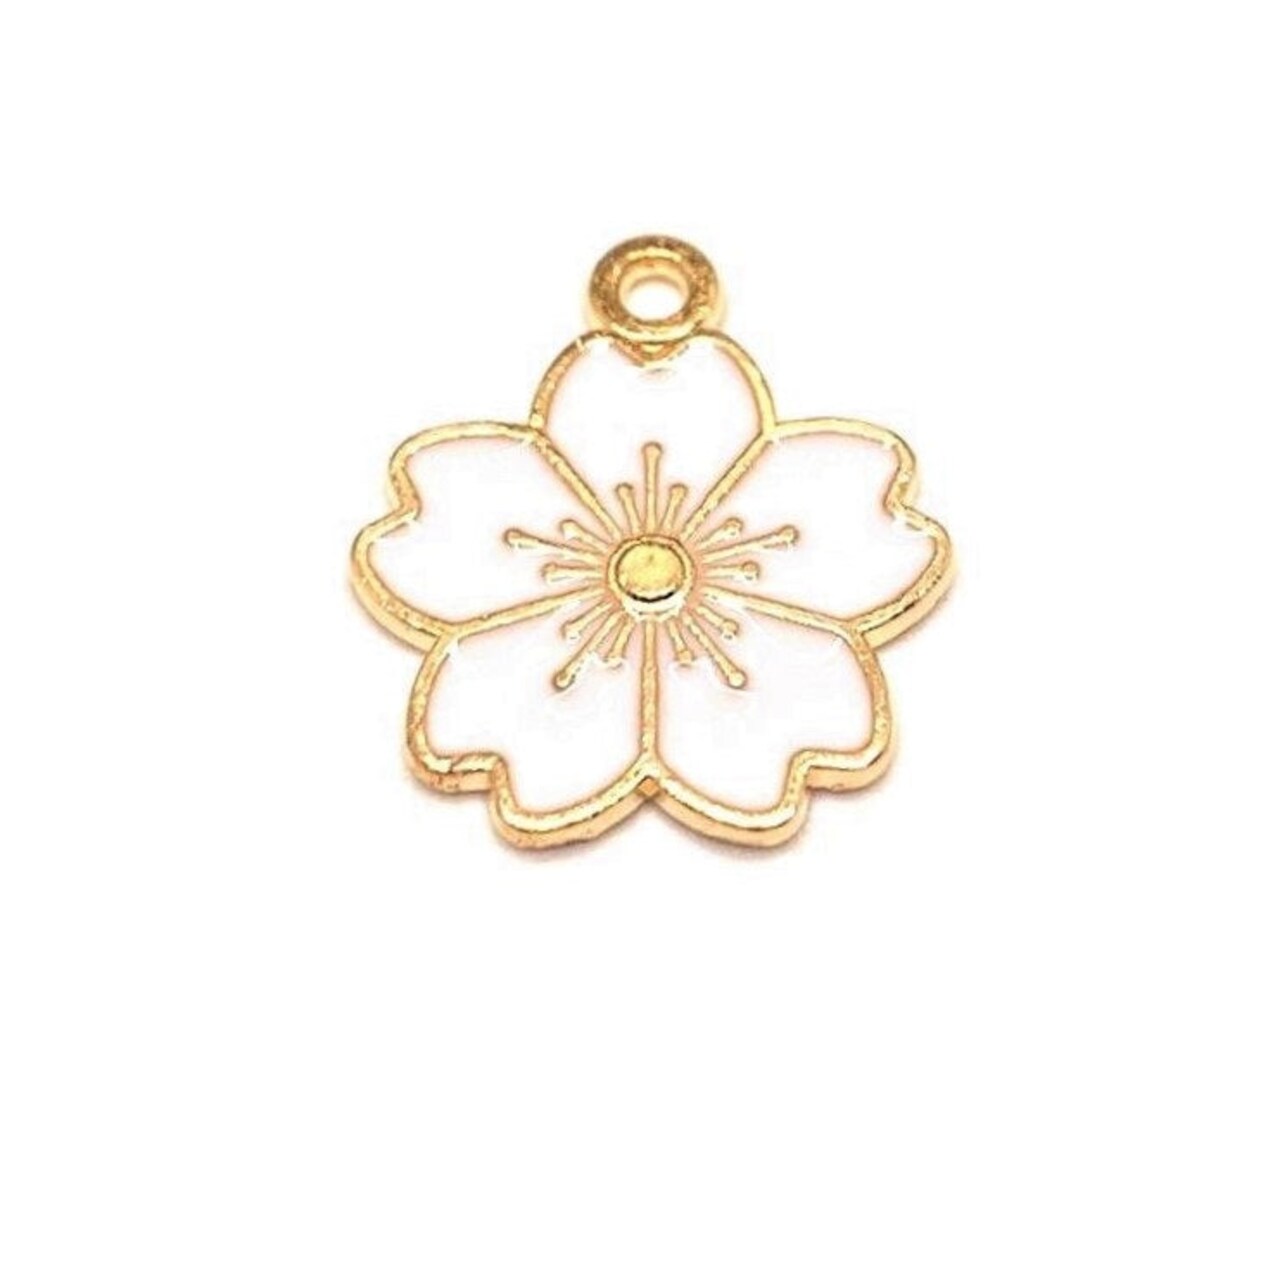 4, 20 or 50 Pieces: White and Gold Cherry Blossom Flower Charms | Michaels